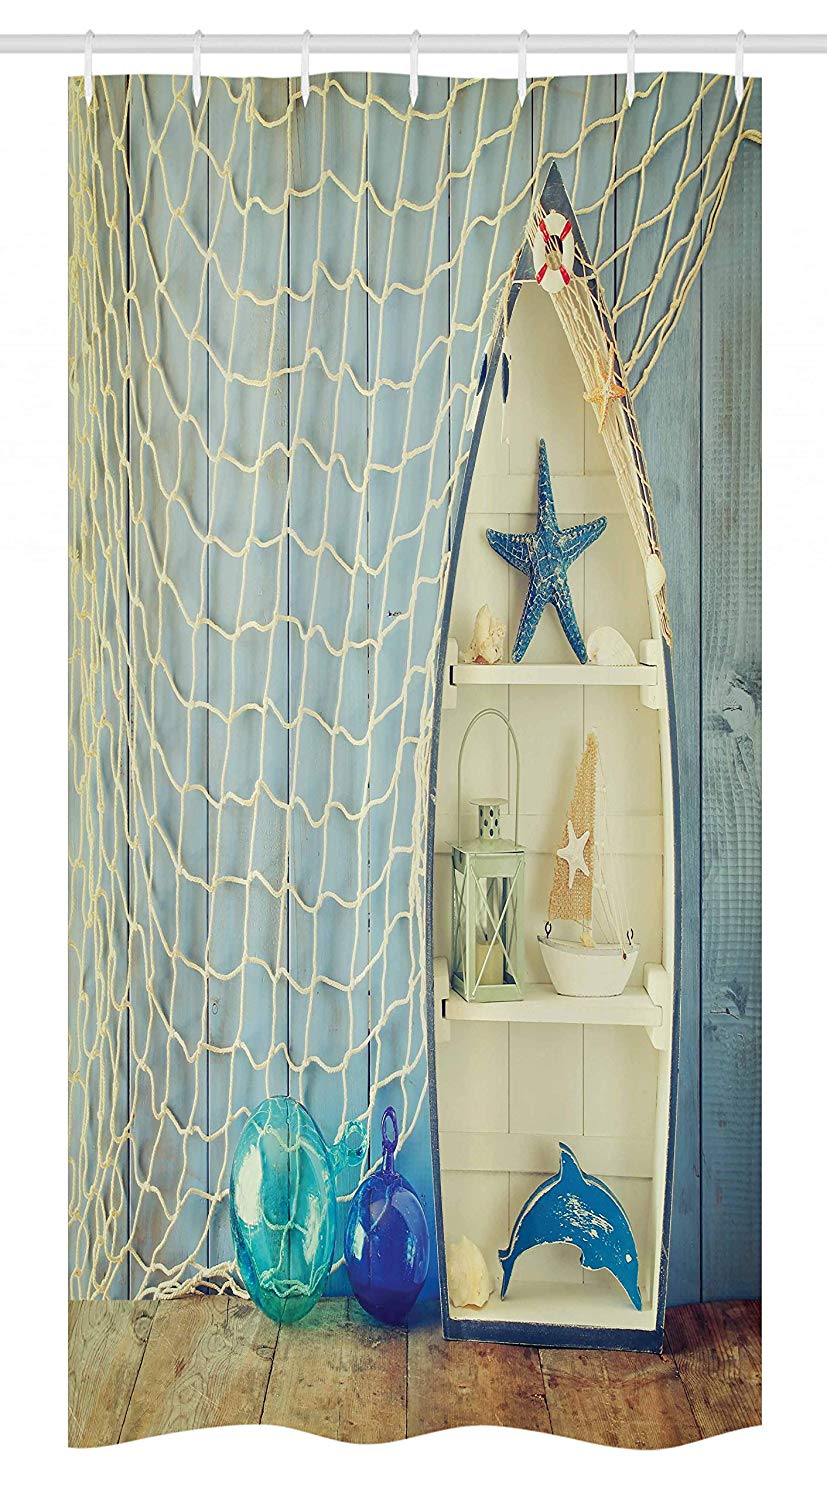 Ambesonne Nautical Stall Shower Curtain, Nautical Boat Standing Against The Wall Other Aquatic Objects Sea Featured Picture, Fabric Bathroom Decor Set with Hooks, 36